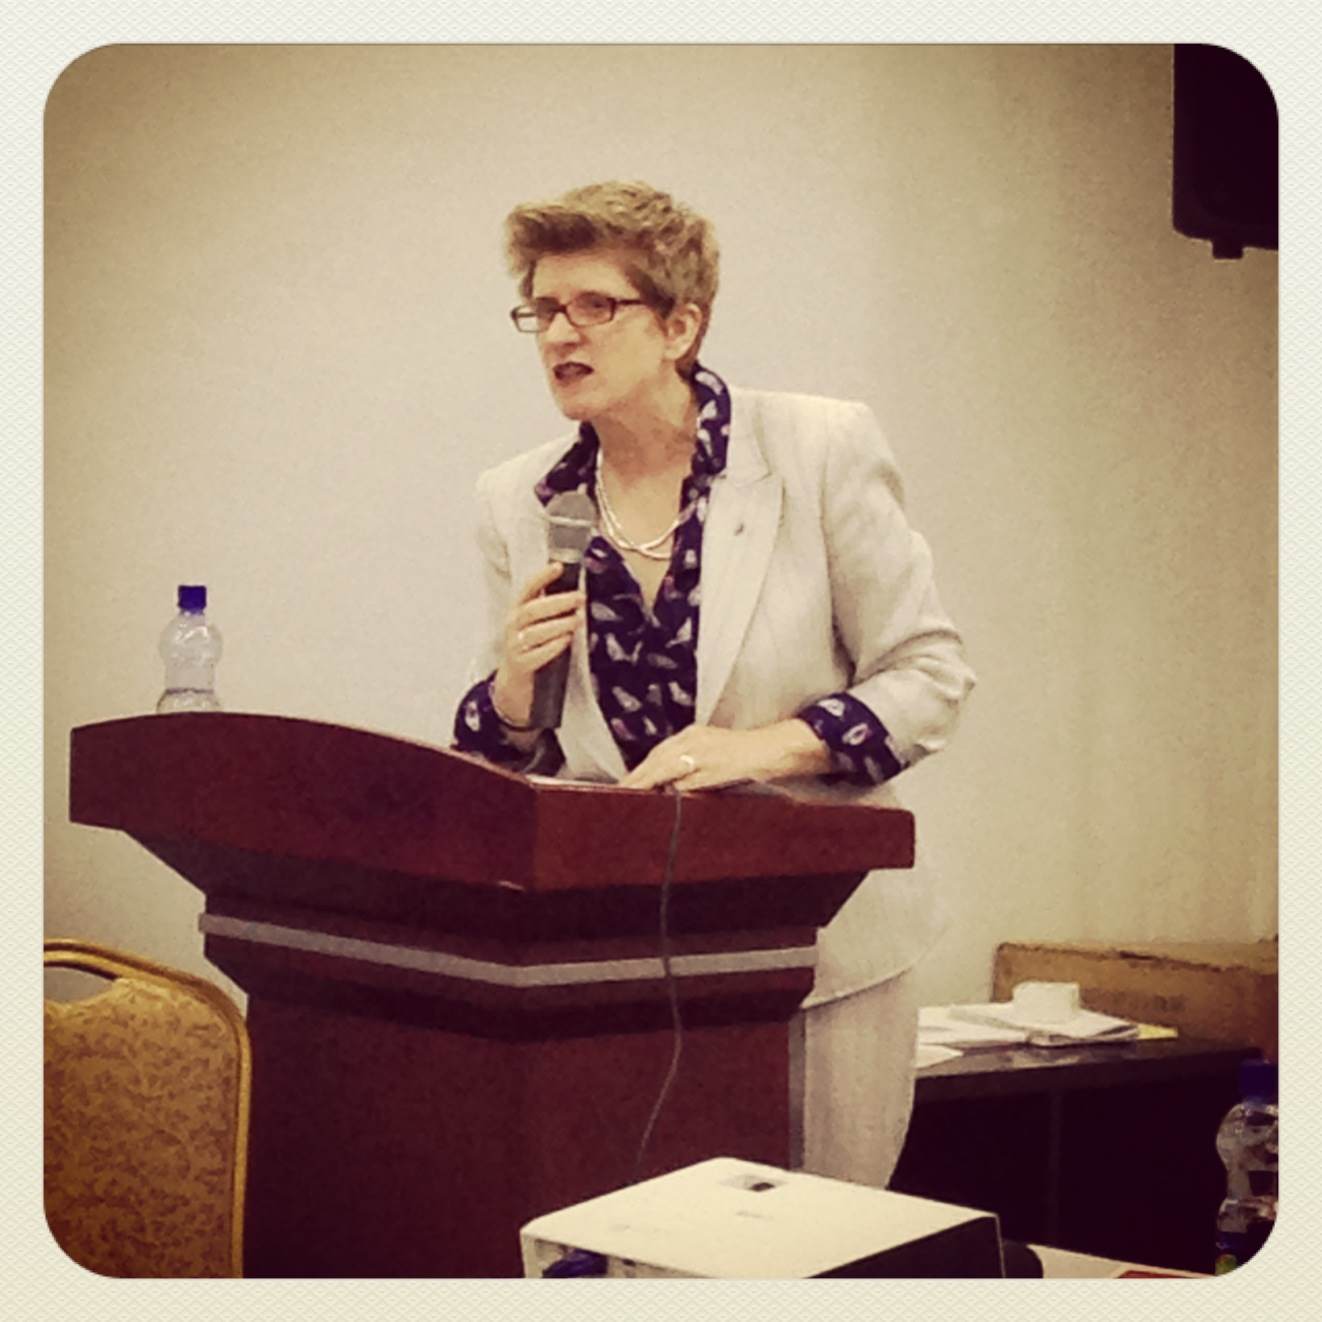 Kate Gilmore, Deputy Executive Director of UNFPA